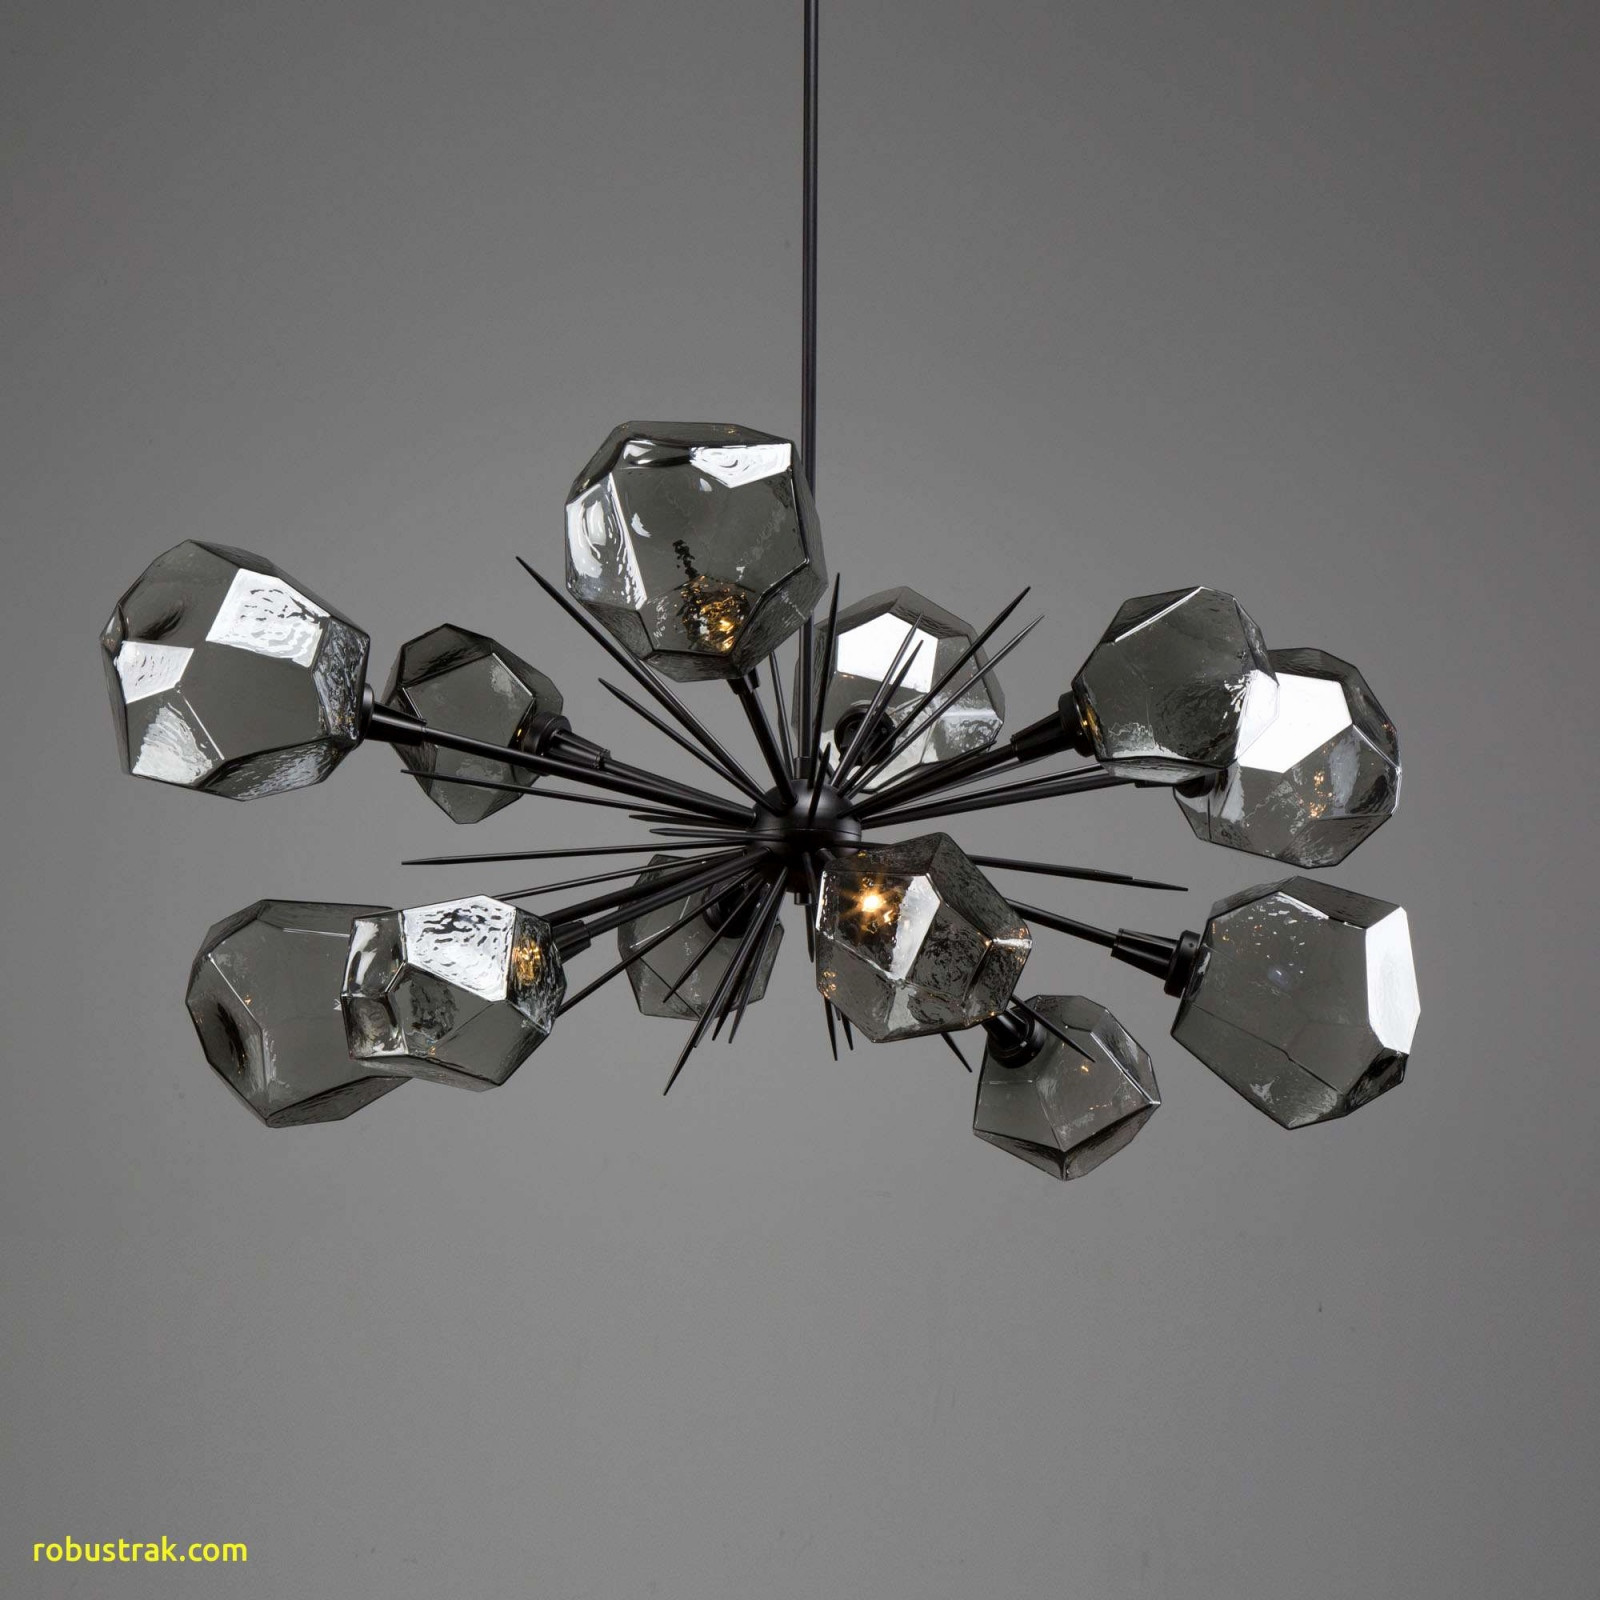 23 Lovely Modern Crystal Vase 2024 free download modern crystal vase of agha contemporary crystal chandelier agha interiors intended for gem oval starburst chandelier plb0039 0d gem oval starburst chandelier plb0039 0d from modern ceiling 